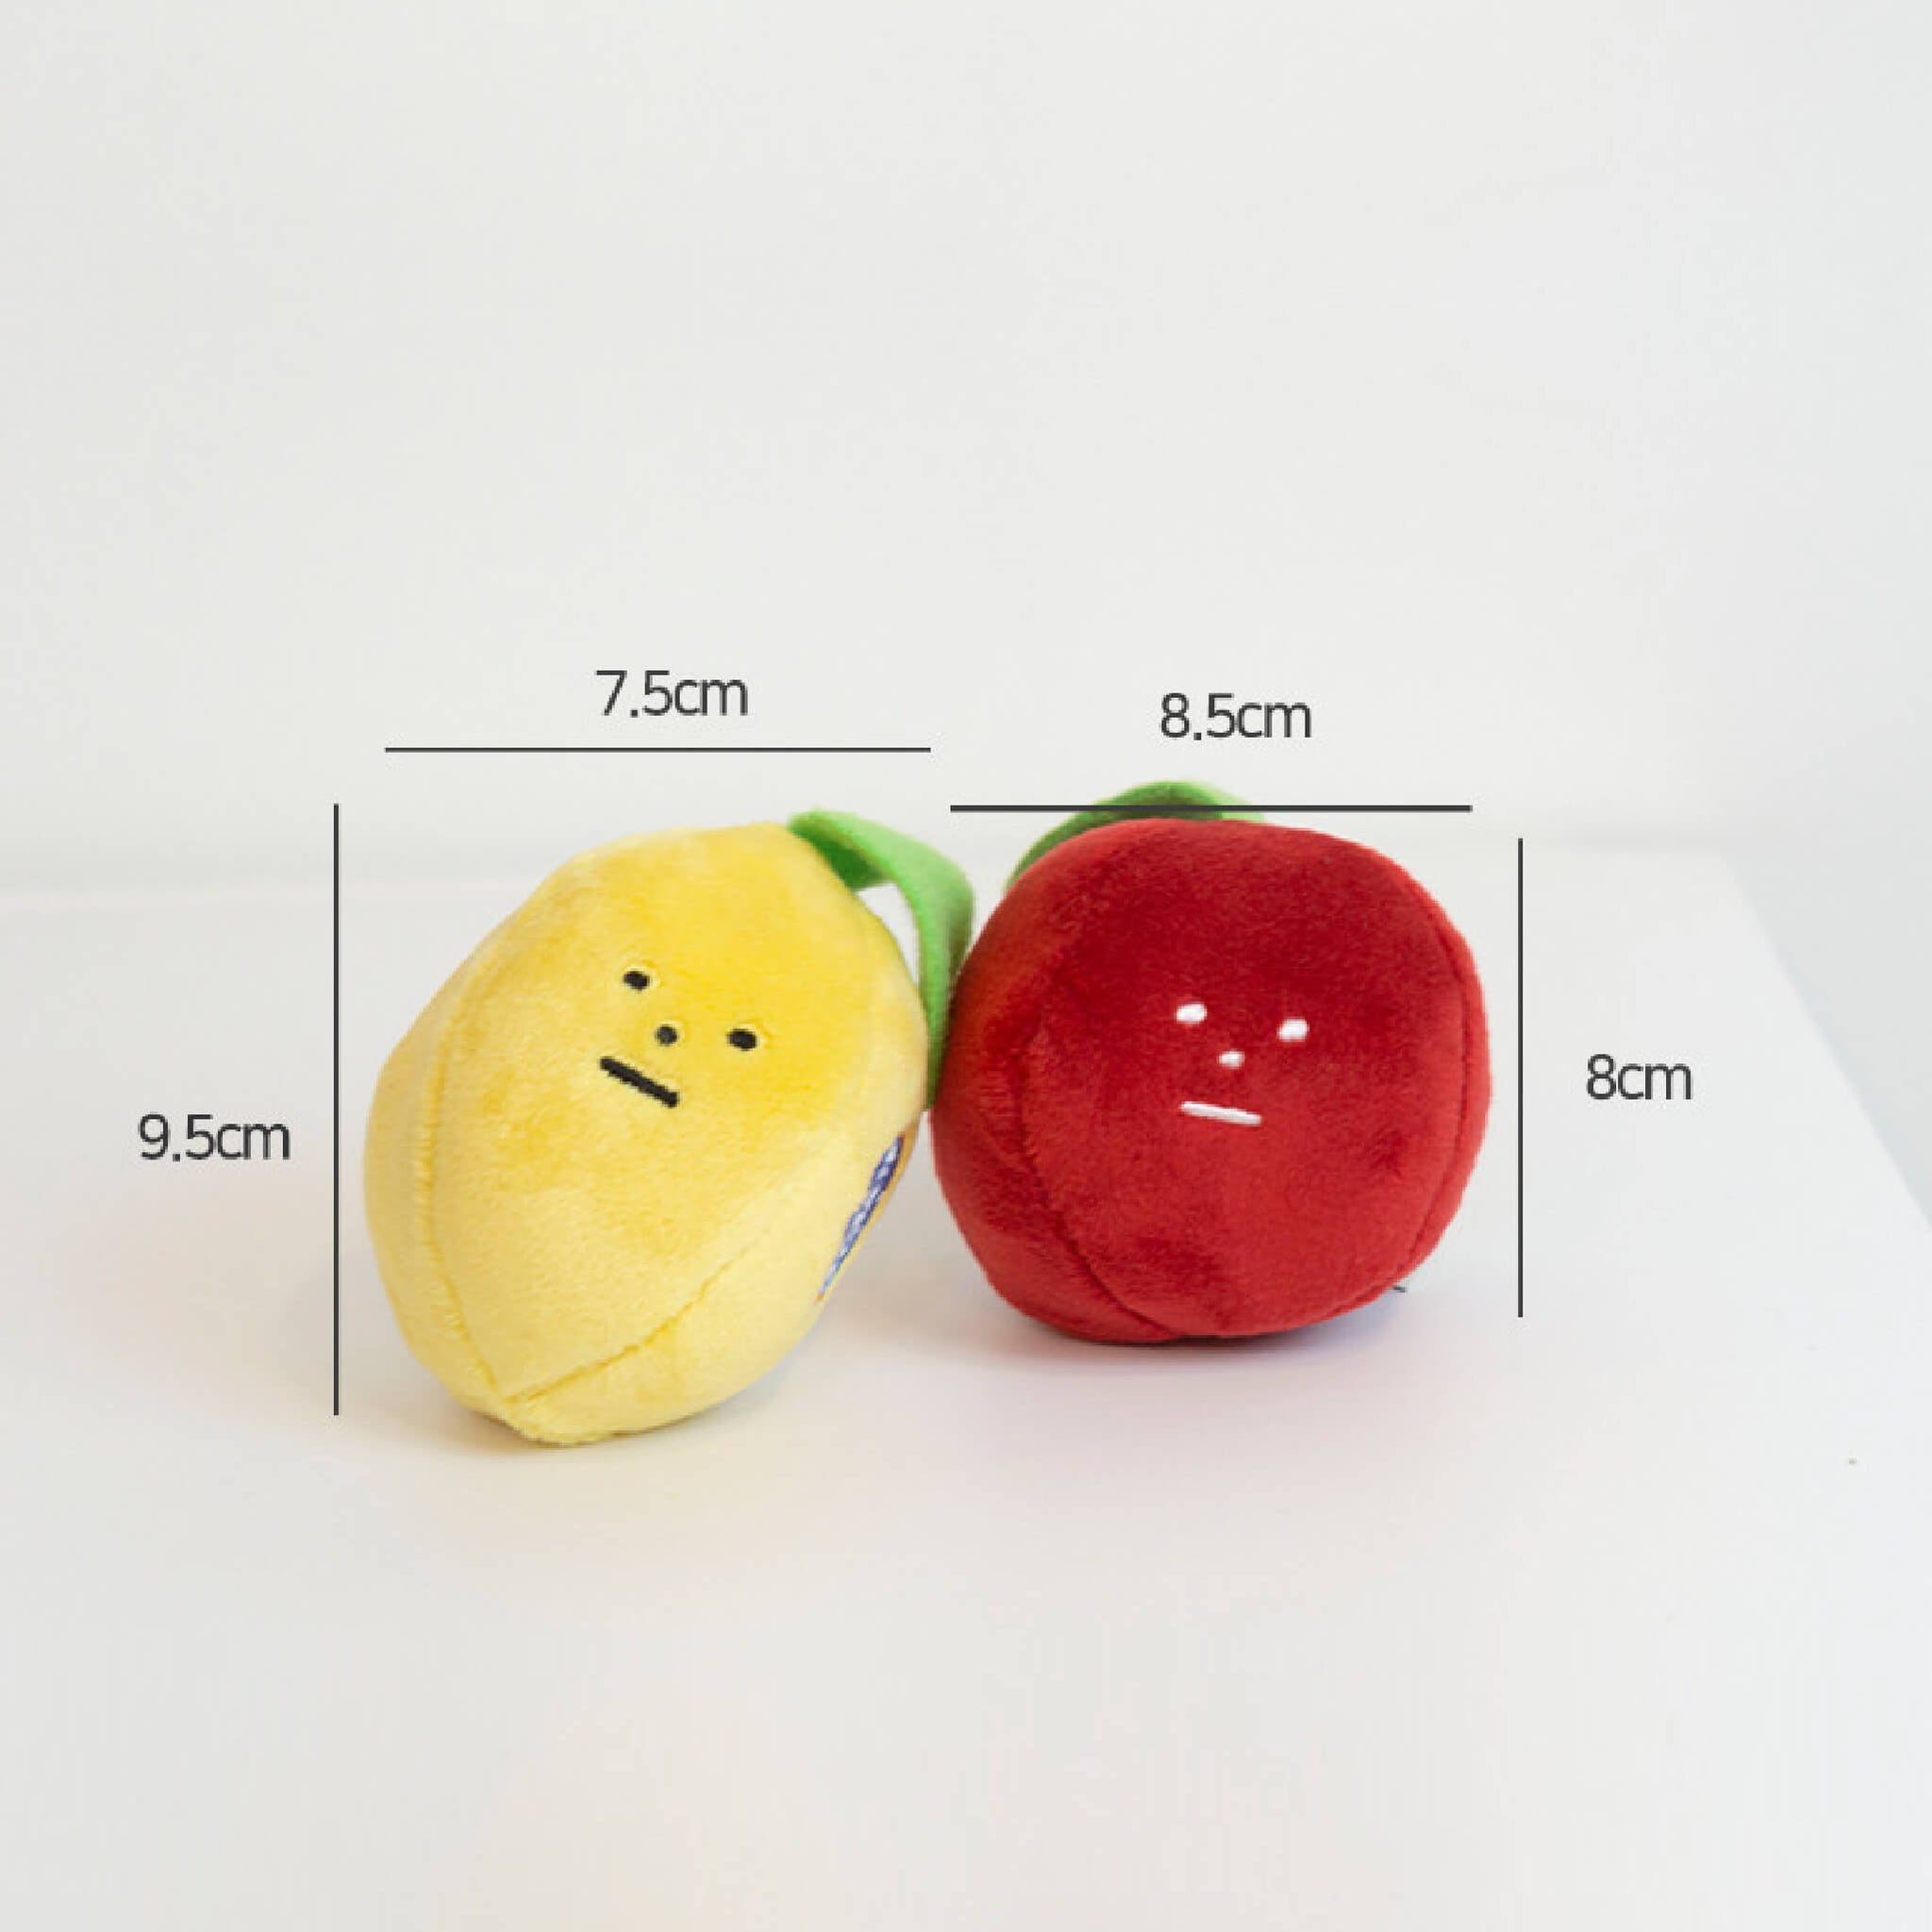 Dimensions for lemon and apple toy.